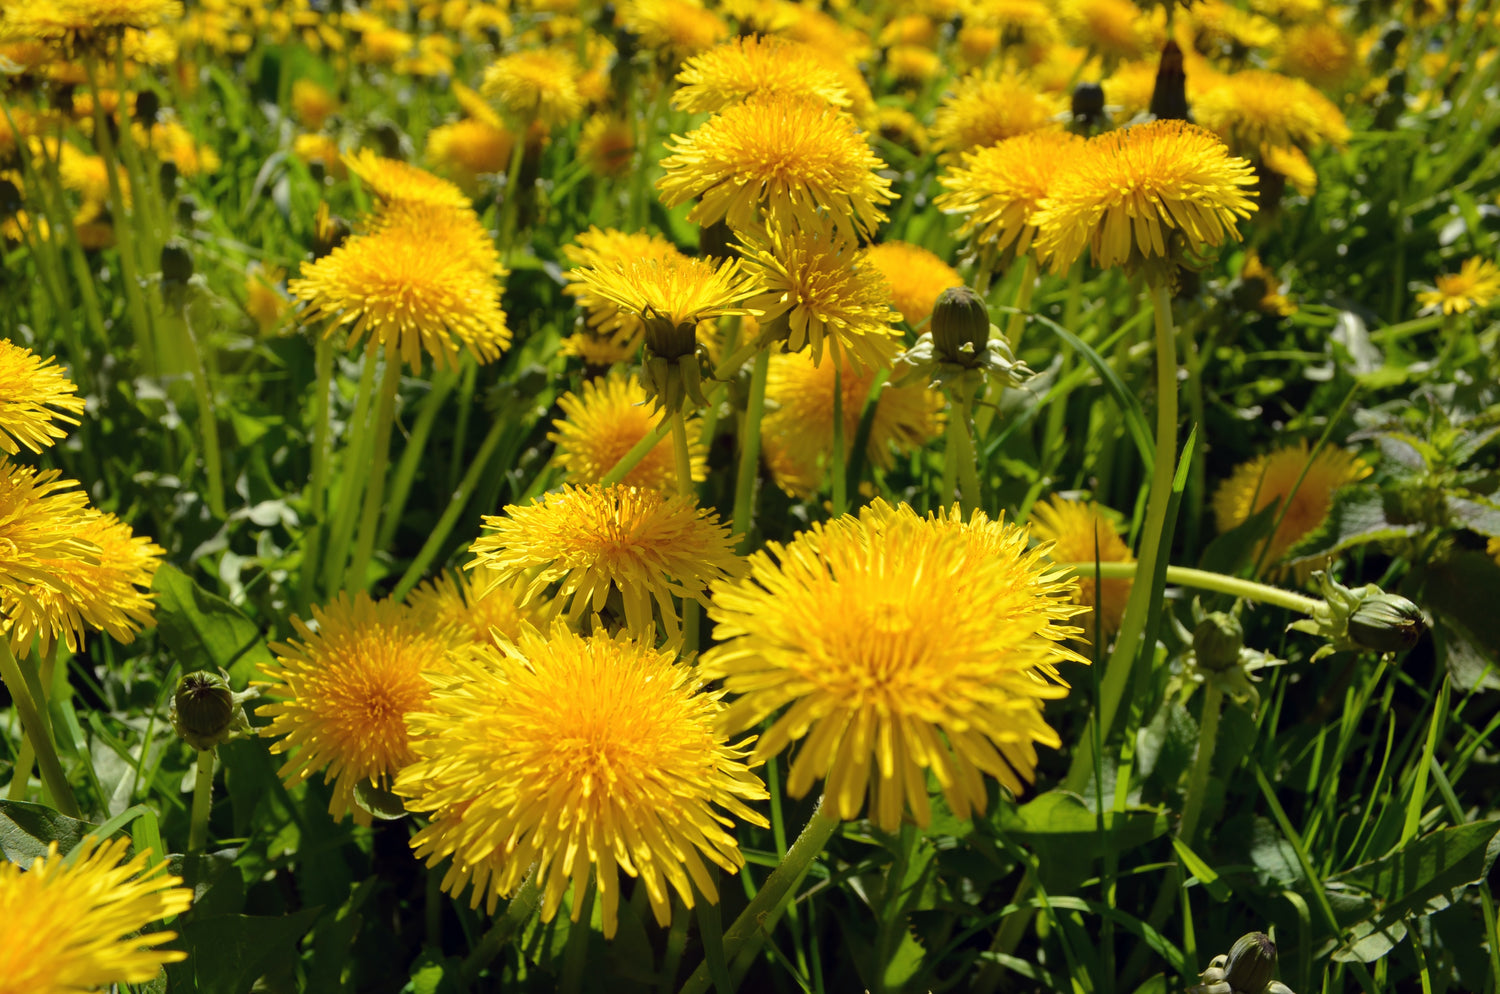 Image of Dandelions harvested for Dandelion Root at Sacred Plant Co's Low Water Regenerative Colorado Farm, renowned for sustainable farming practices.